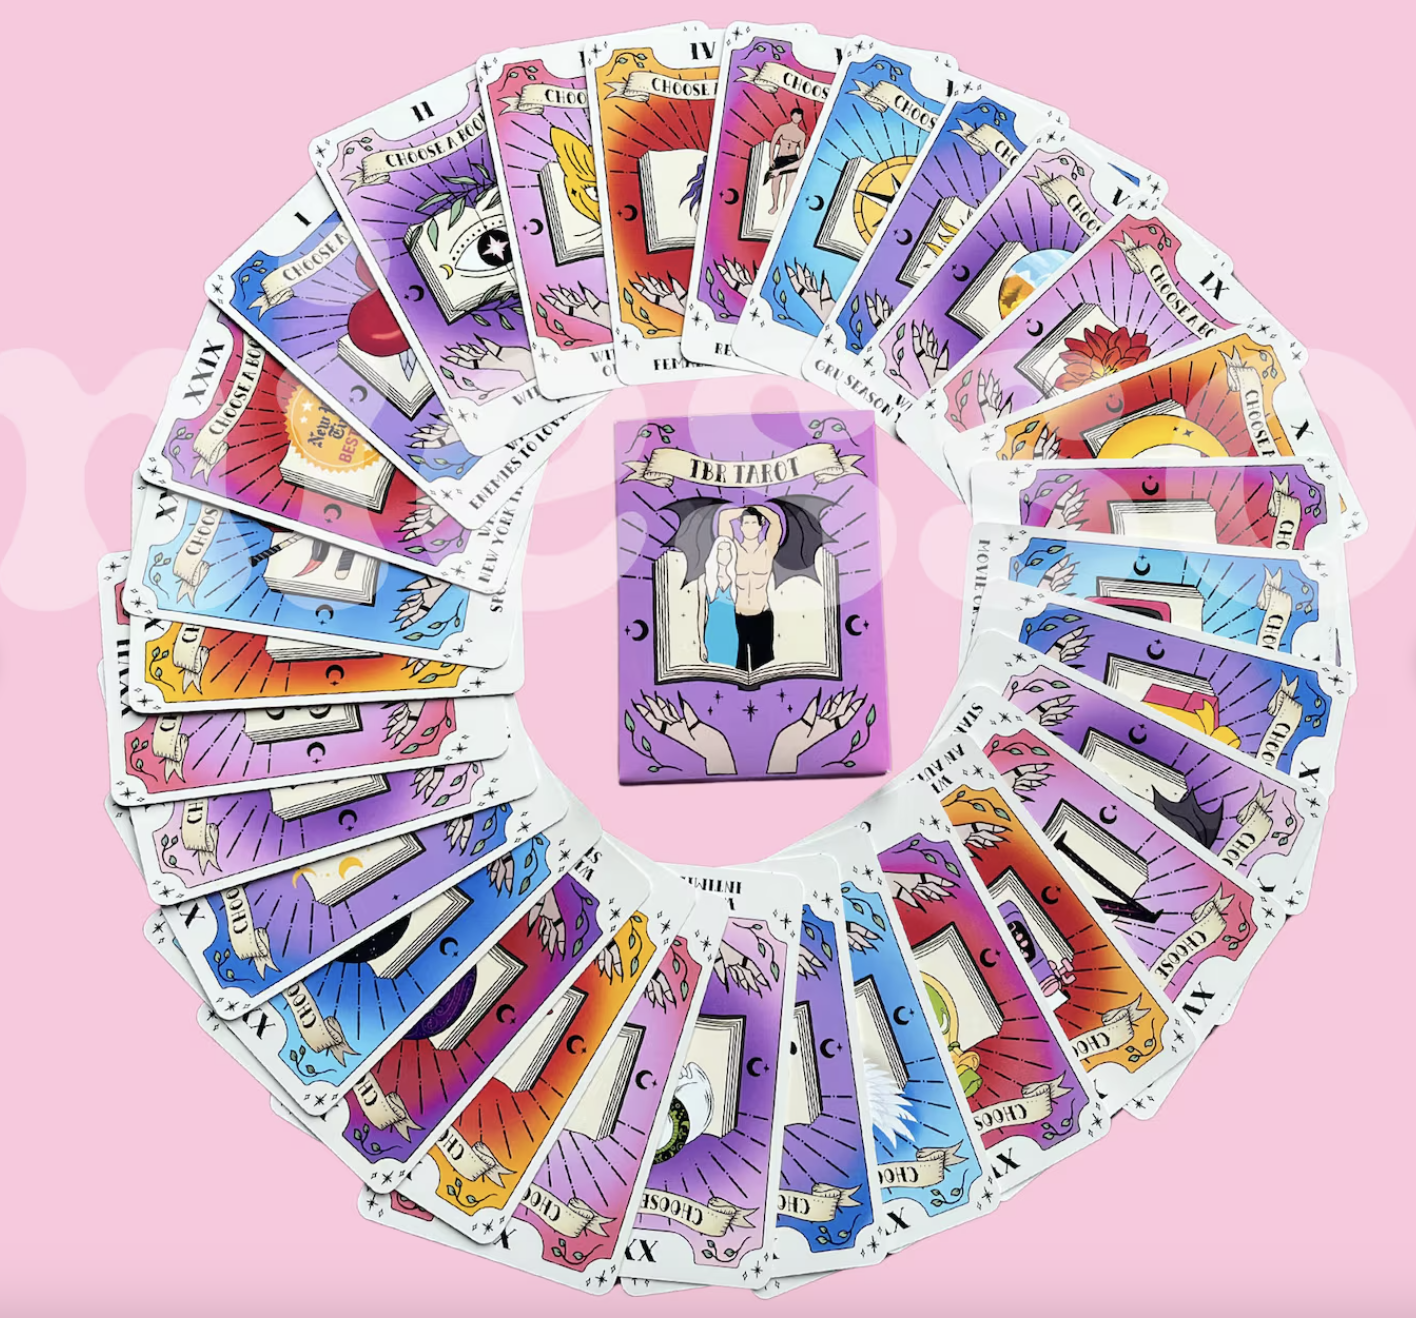 Image of a set of colorful tarot cards with reading prompts laid out in a circle on a pink background